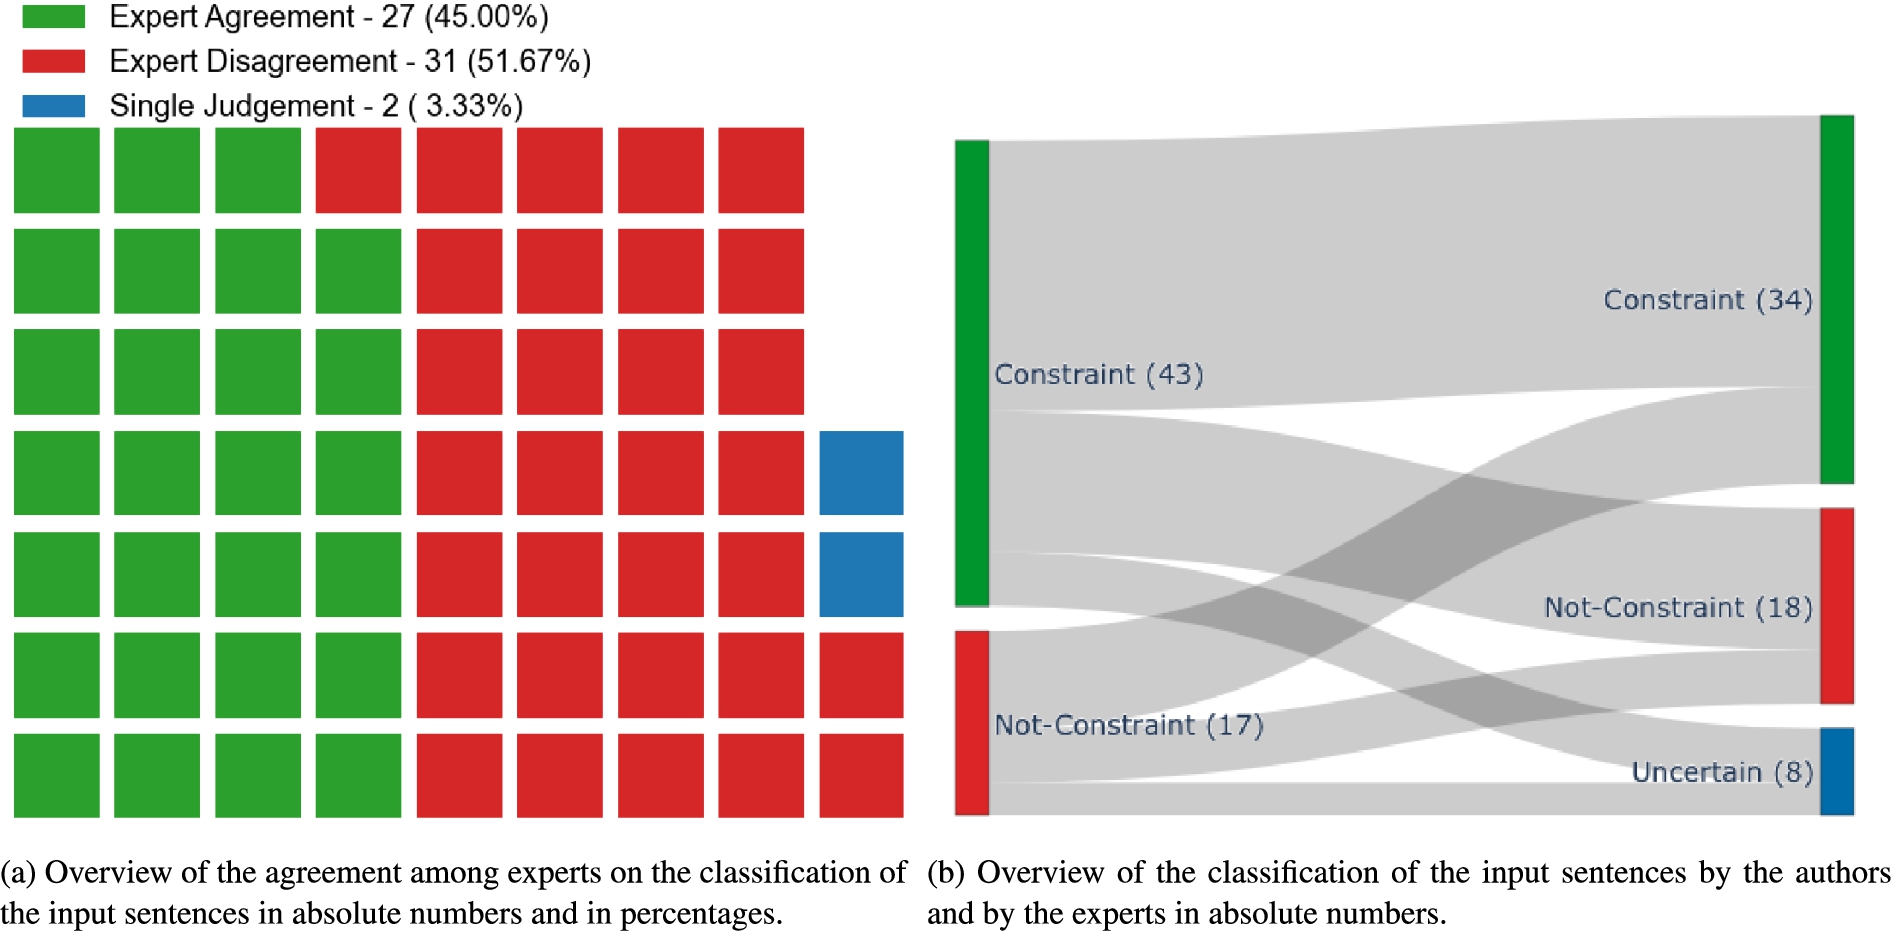 Results of the constraint classification task in terms of (a) agreement among experts on the classifications, and (b) alignment between the classification proposed by the authors (left) and by the experts’ majority vote (right).